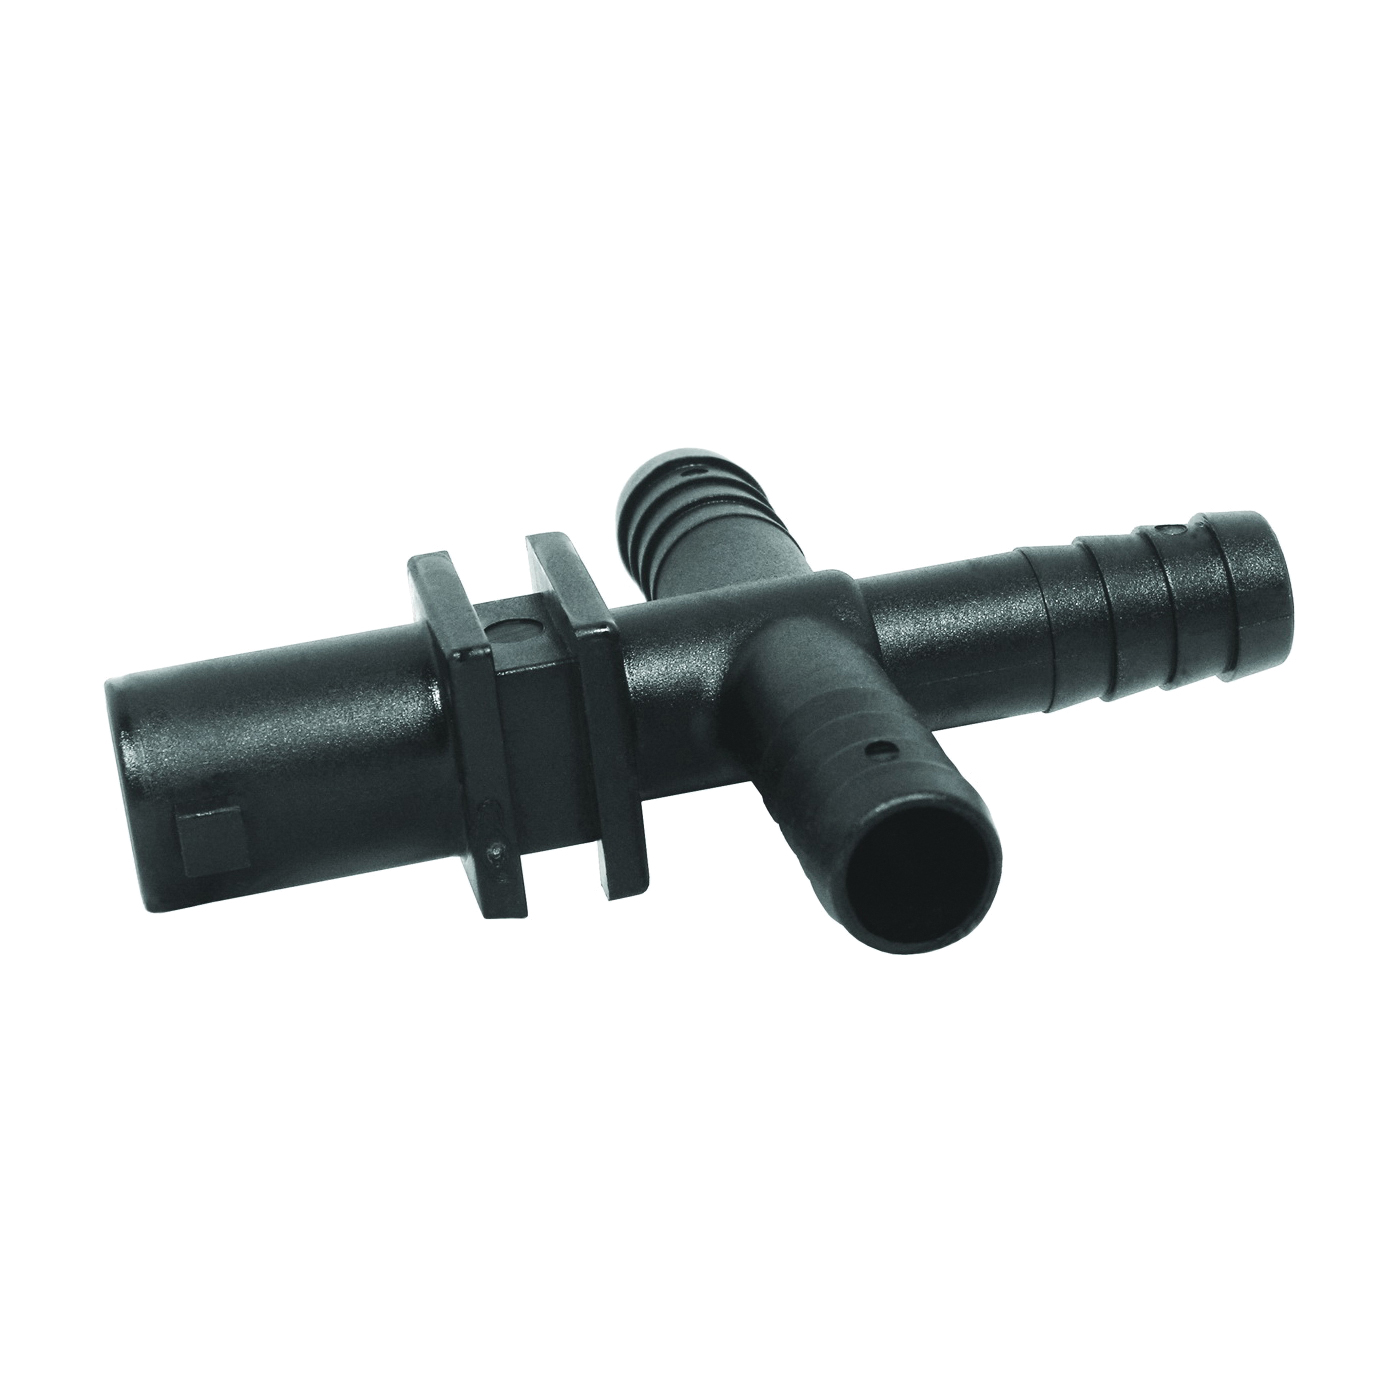 Y8231017 Dry Boom Nozzle Body Cross, 3/4 in, Quick x Hose Barb, 7 psi Pressure, EPDM Rubber